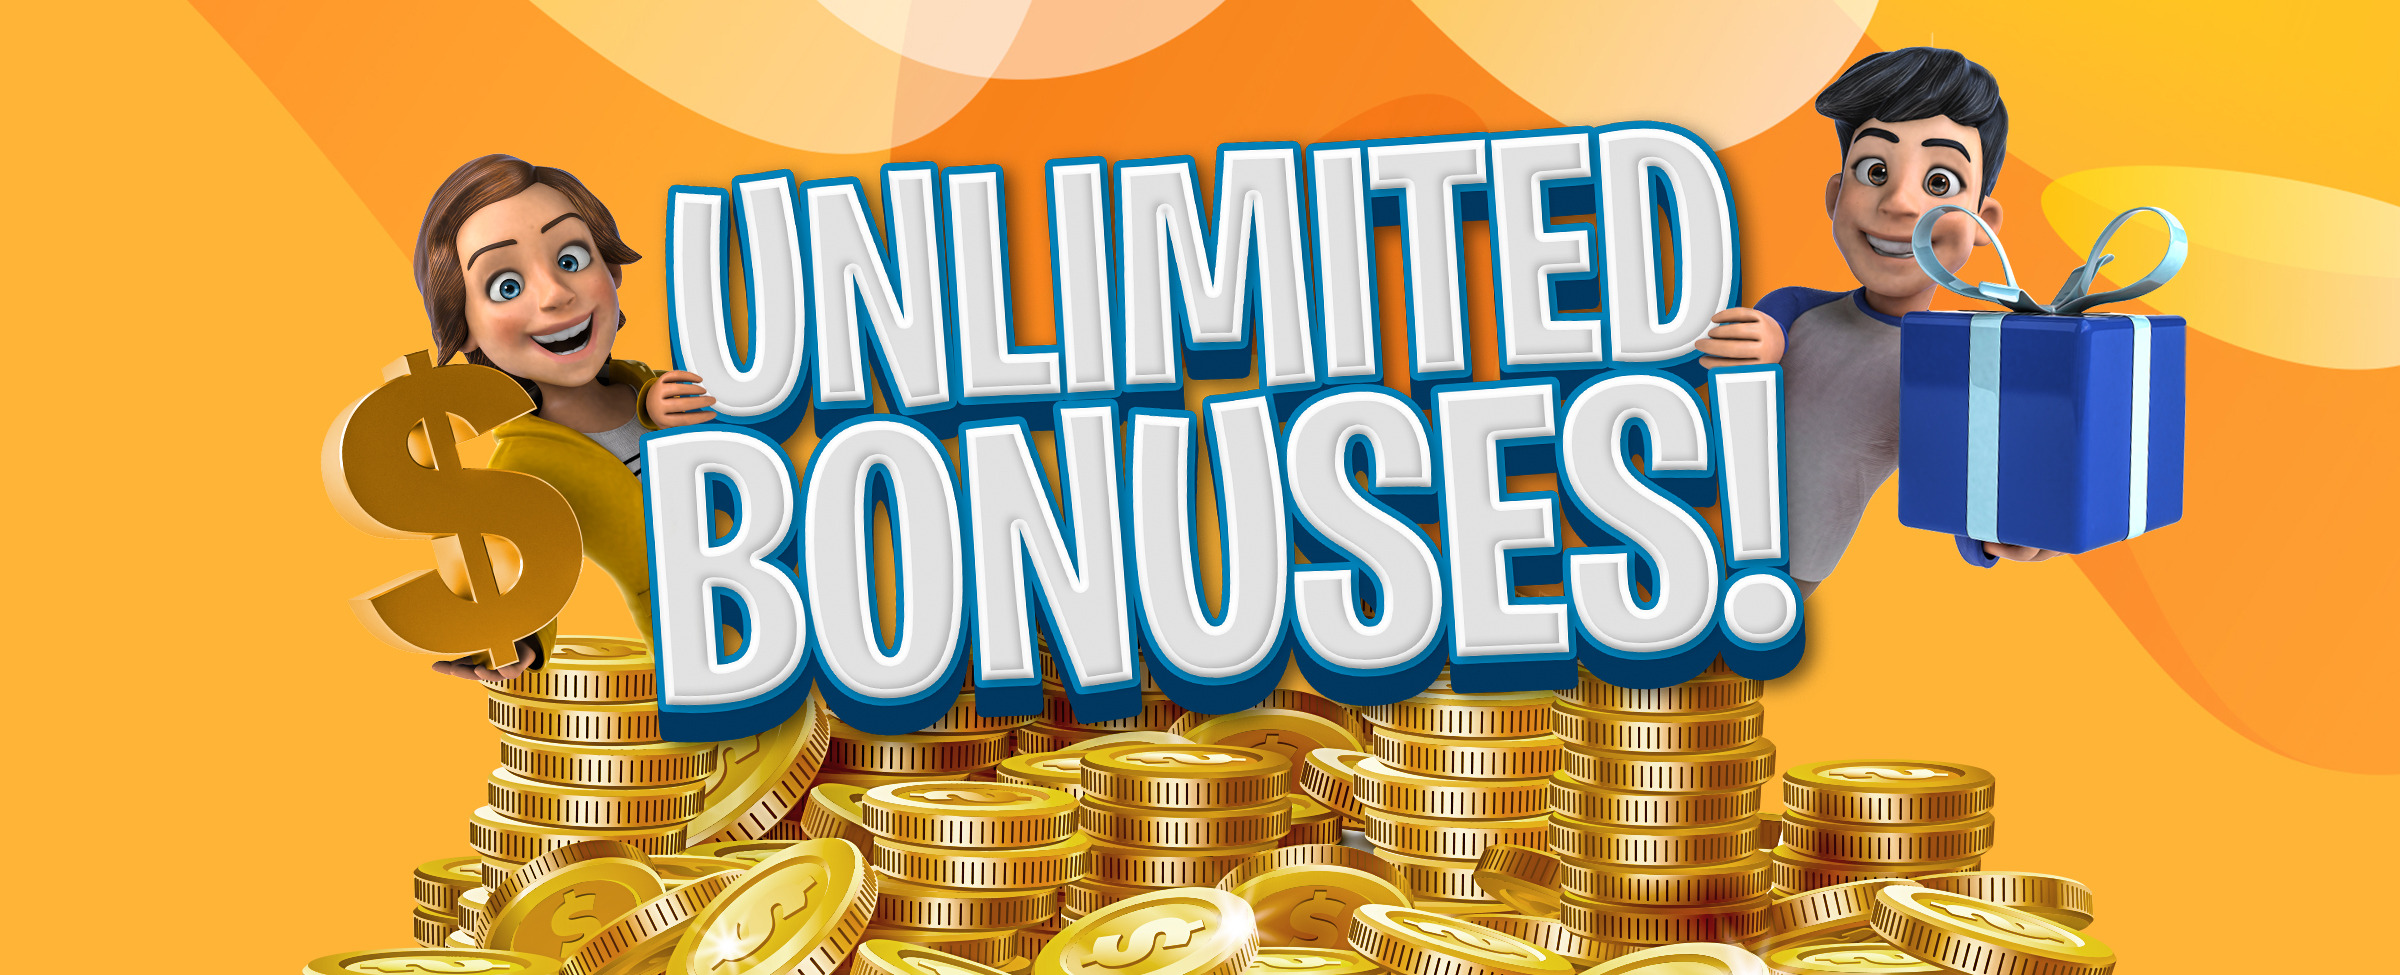 Not only does SlotsLV reward you for bringing others to our casino, but you can bring as many friends as you like. That’s right: unlimited rewards potentially coming your way!